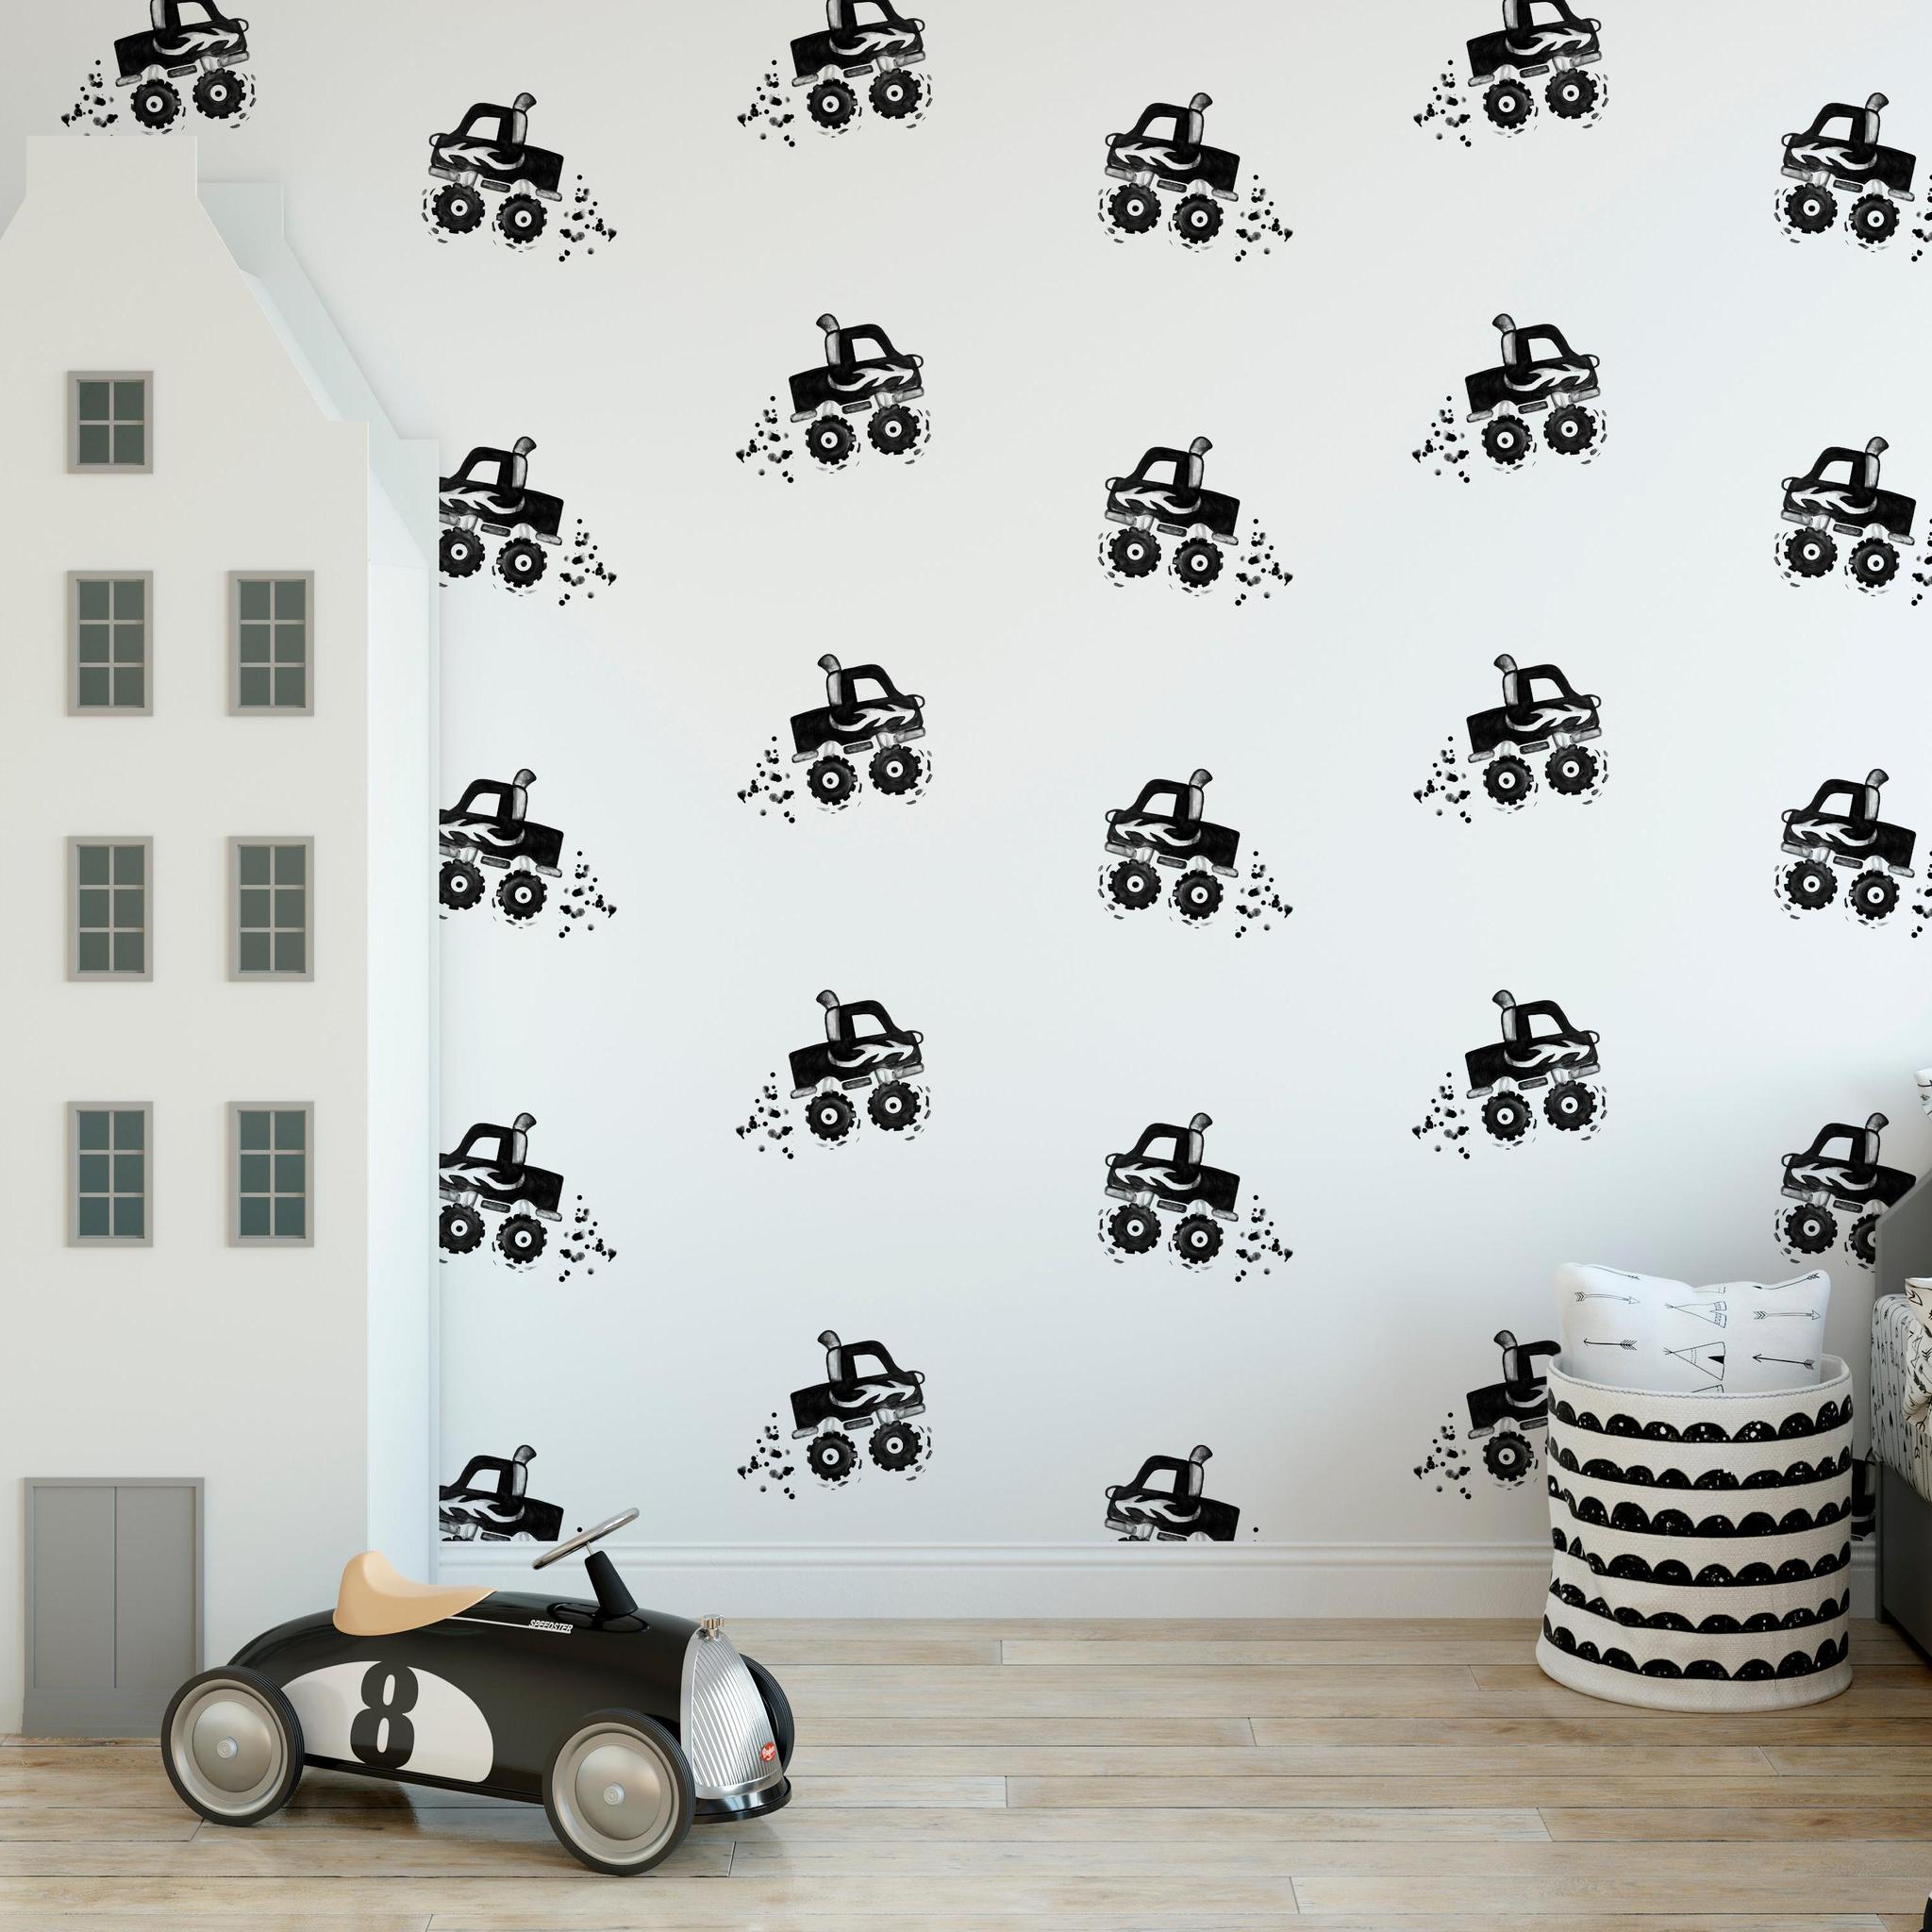 Gimme Some Speed Wallpaper by The Minty Line in a stylish child's bedroom, focusing on the playful wall decor.
